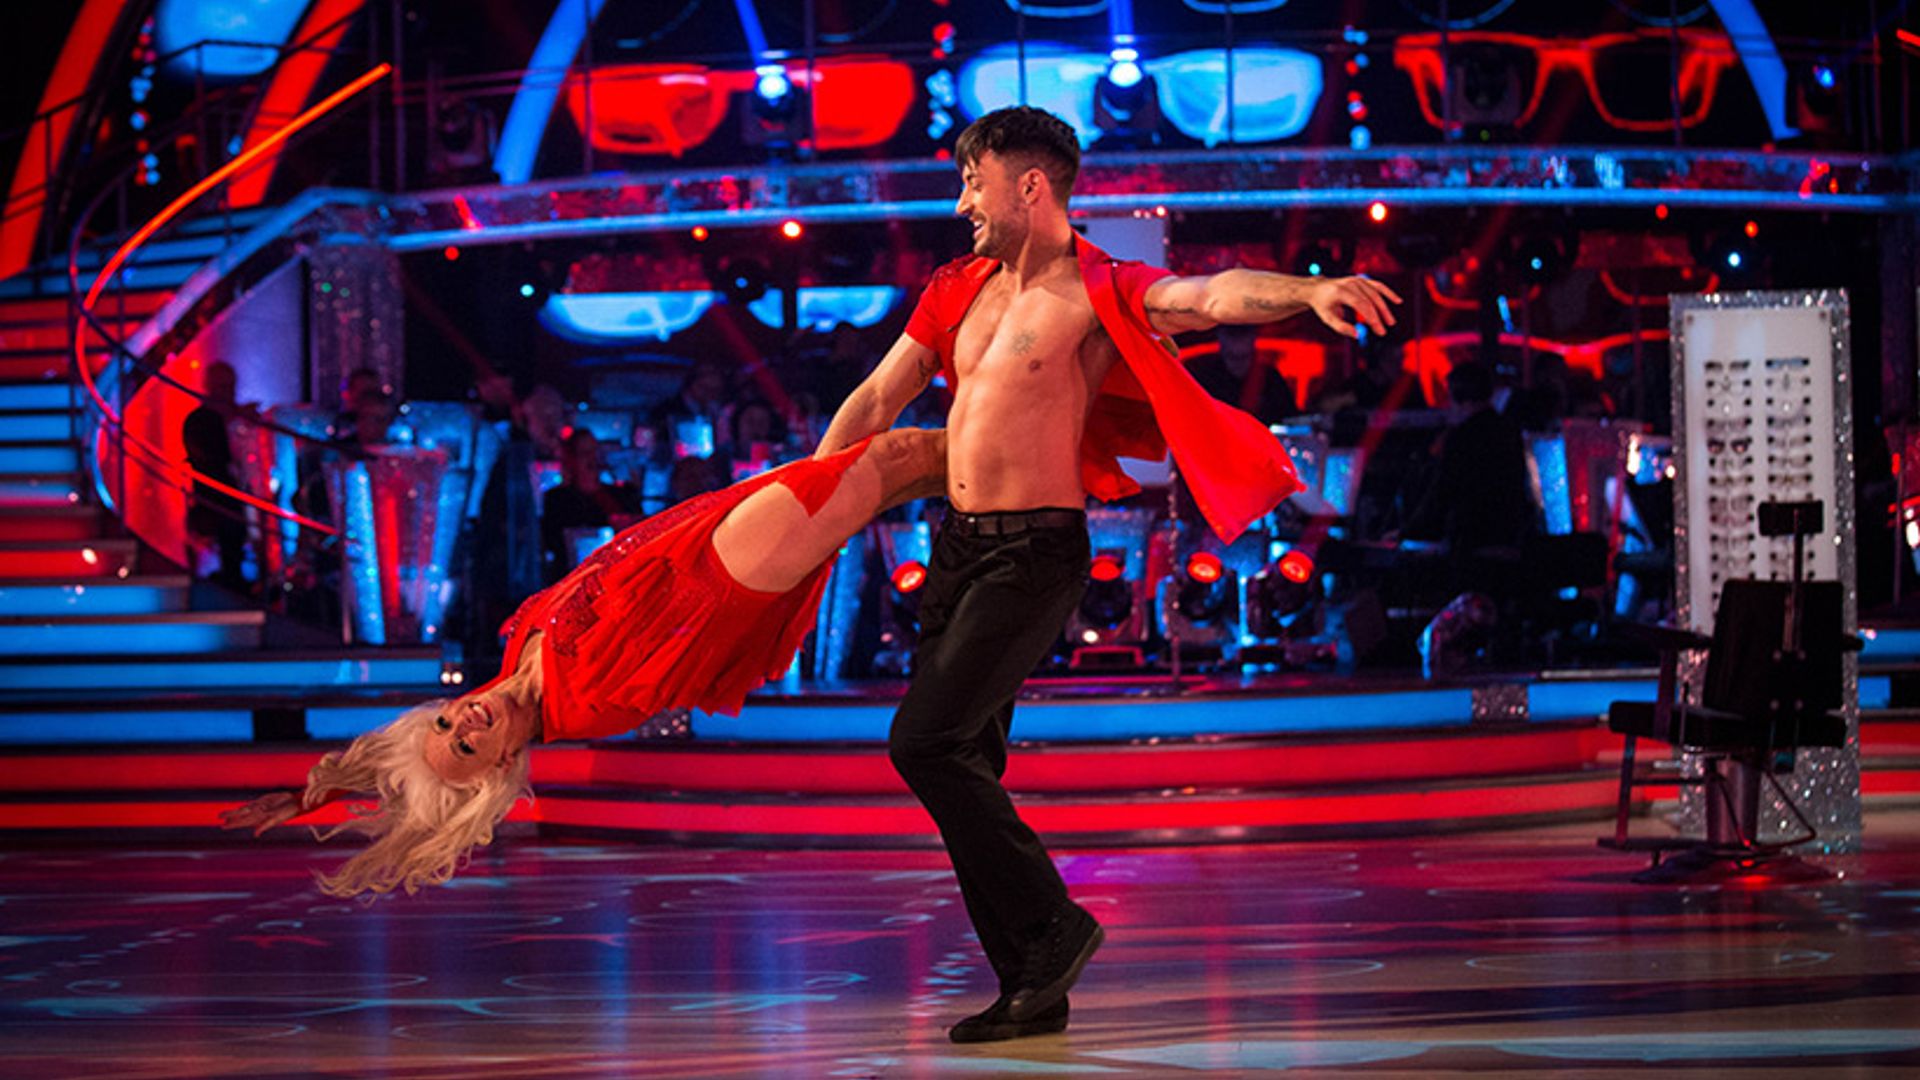 Meet The Strictly Come Dancing Stars A Closer Look At The